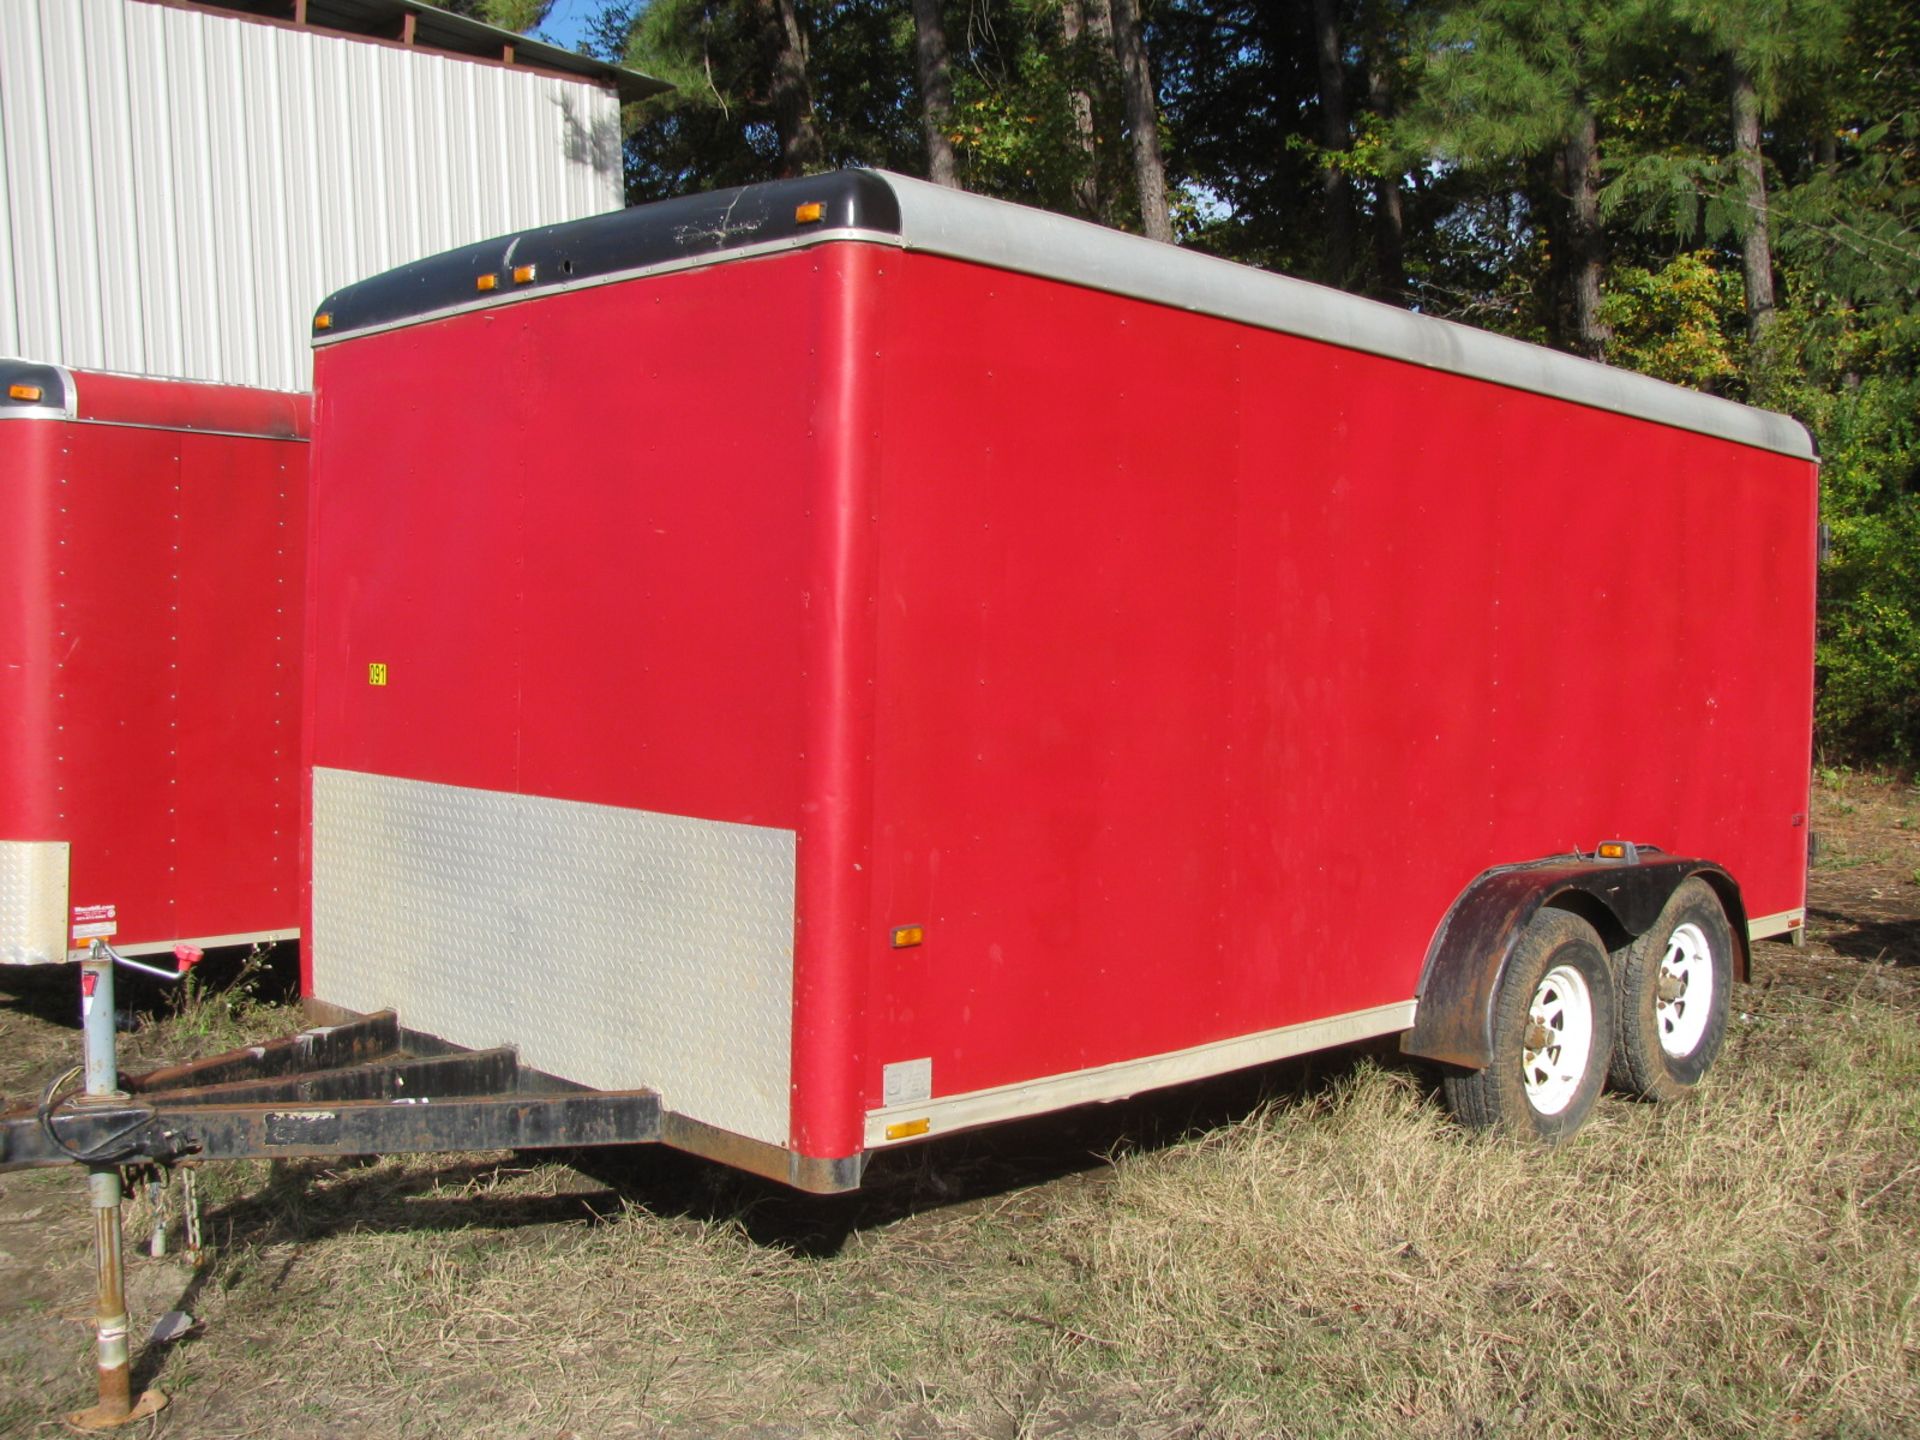 Wells Cargo 16' Enclosed Trailer (No Title) Vin # C200G21X202724 - Image 2 of 5